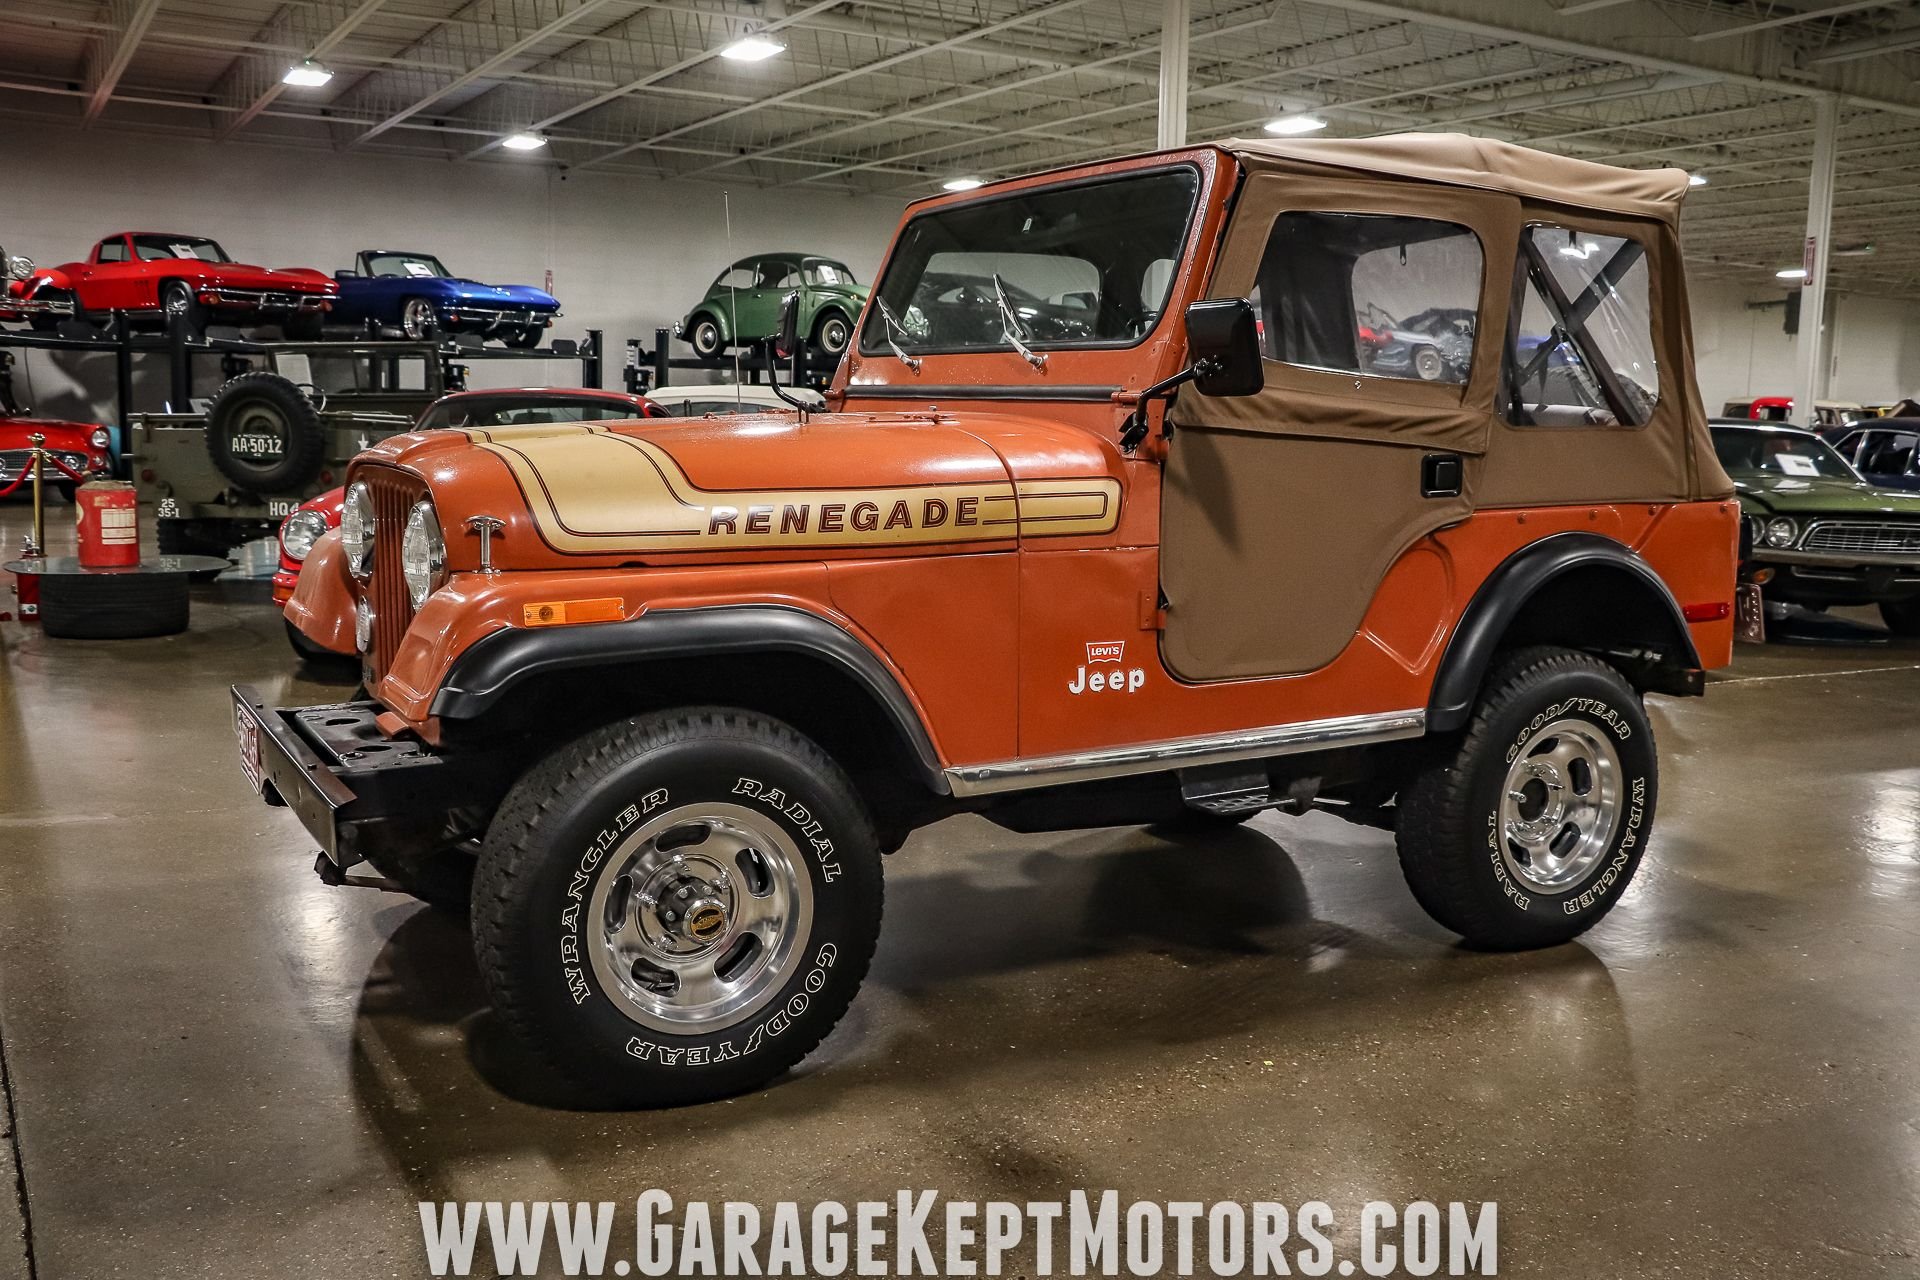 1976 Jeep CJ-5 Levi's Renegade Could Turn As a Cowboy's Summer Road Trip  Dream - autoevolution